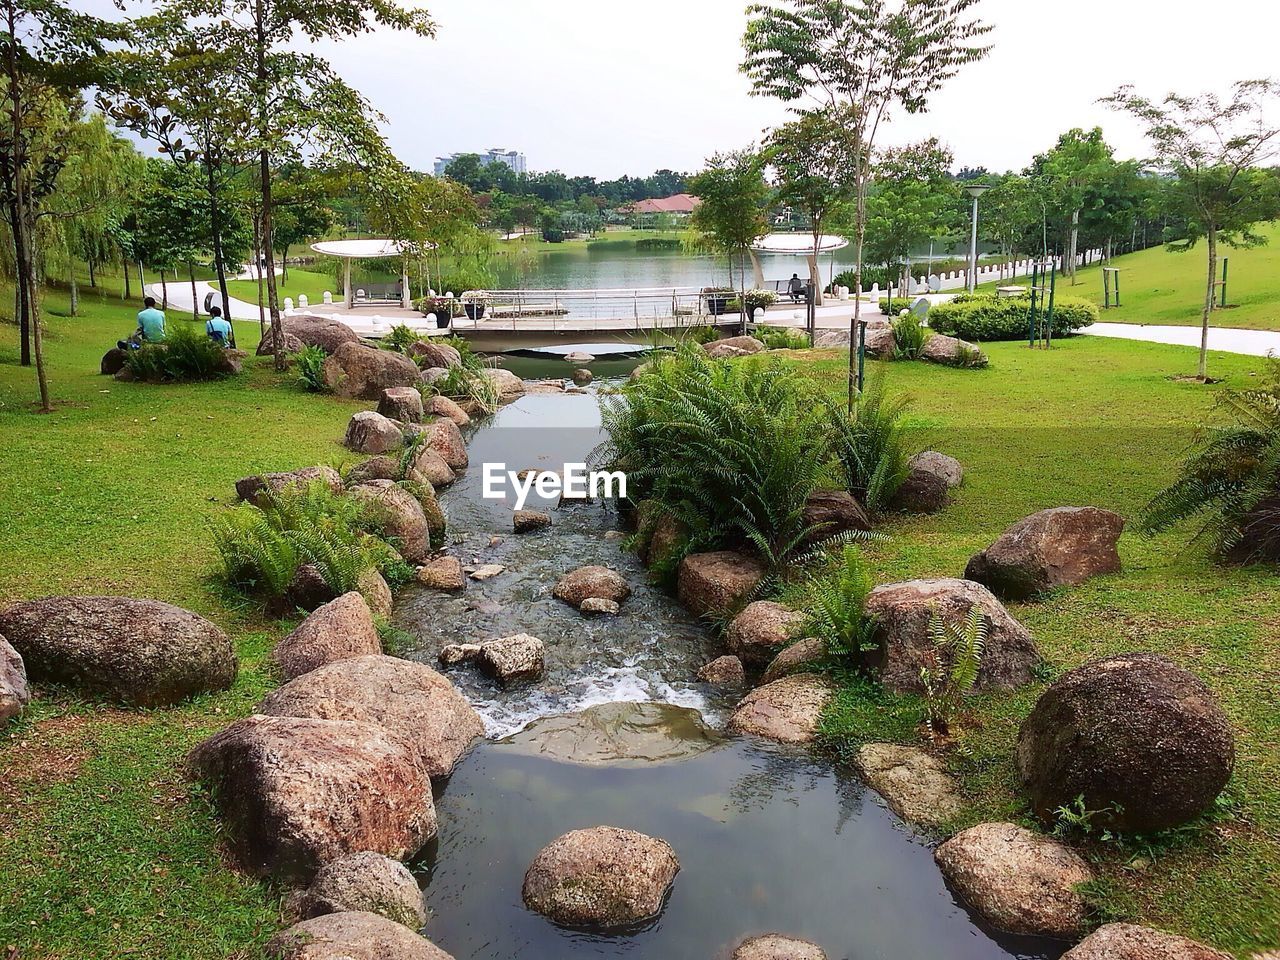 VIEW OF POND IN PARK